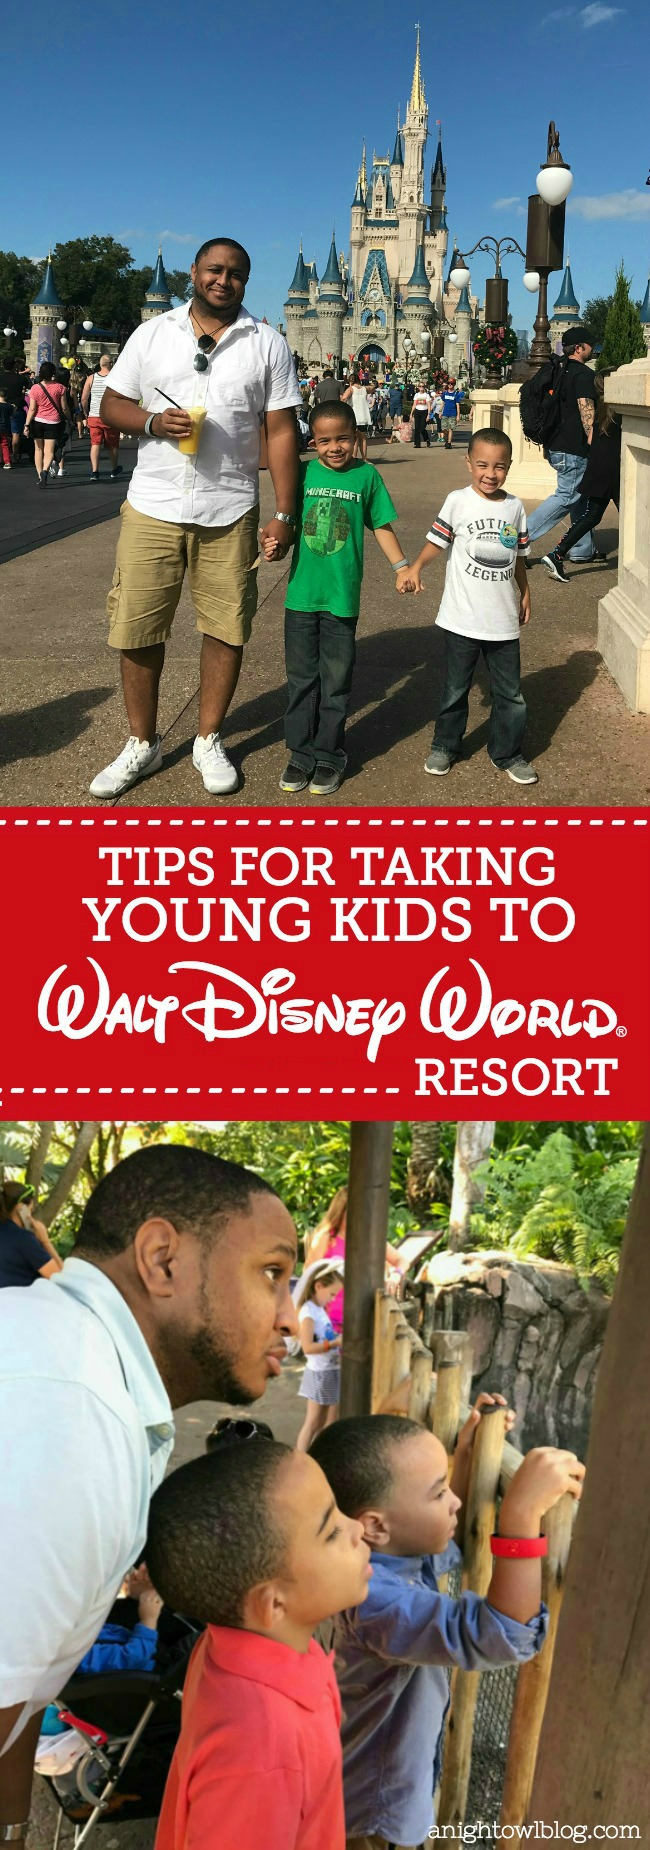 Thoughts and experiences visiting The Walt Disney World Theme Parks with young kids and our tips for navigating and making the most of your trip!